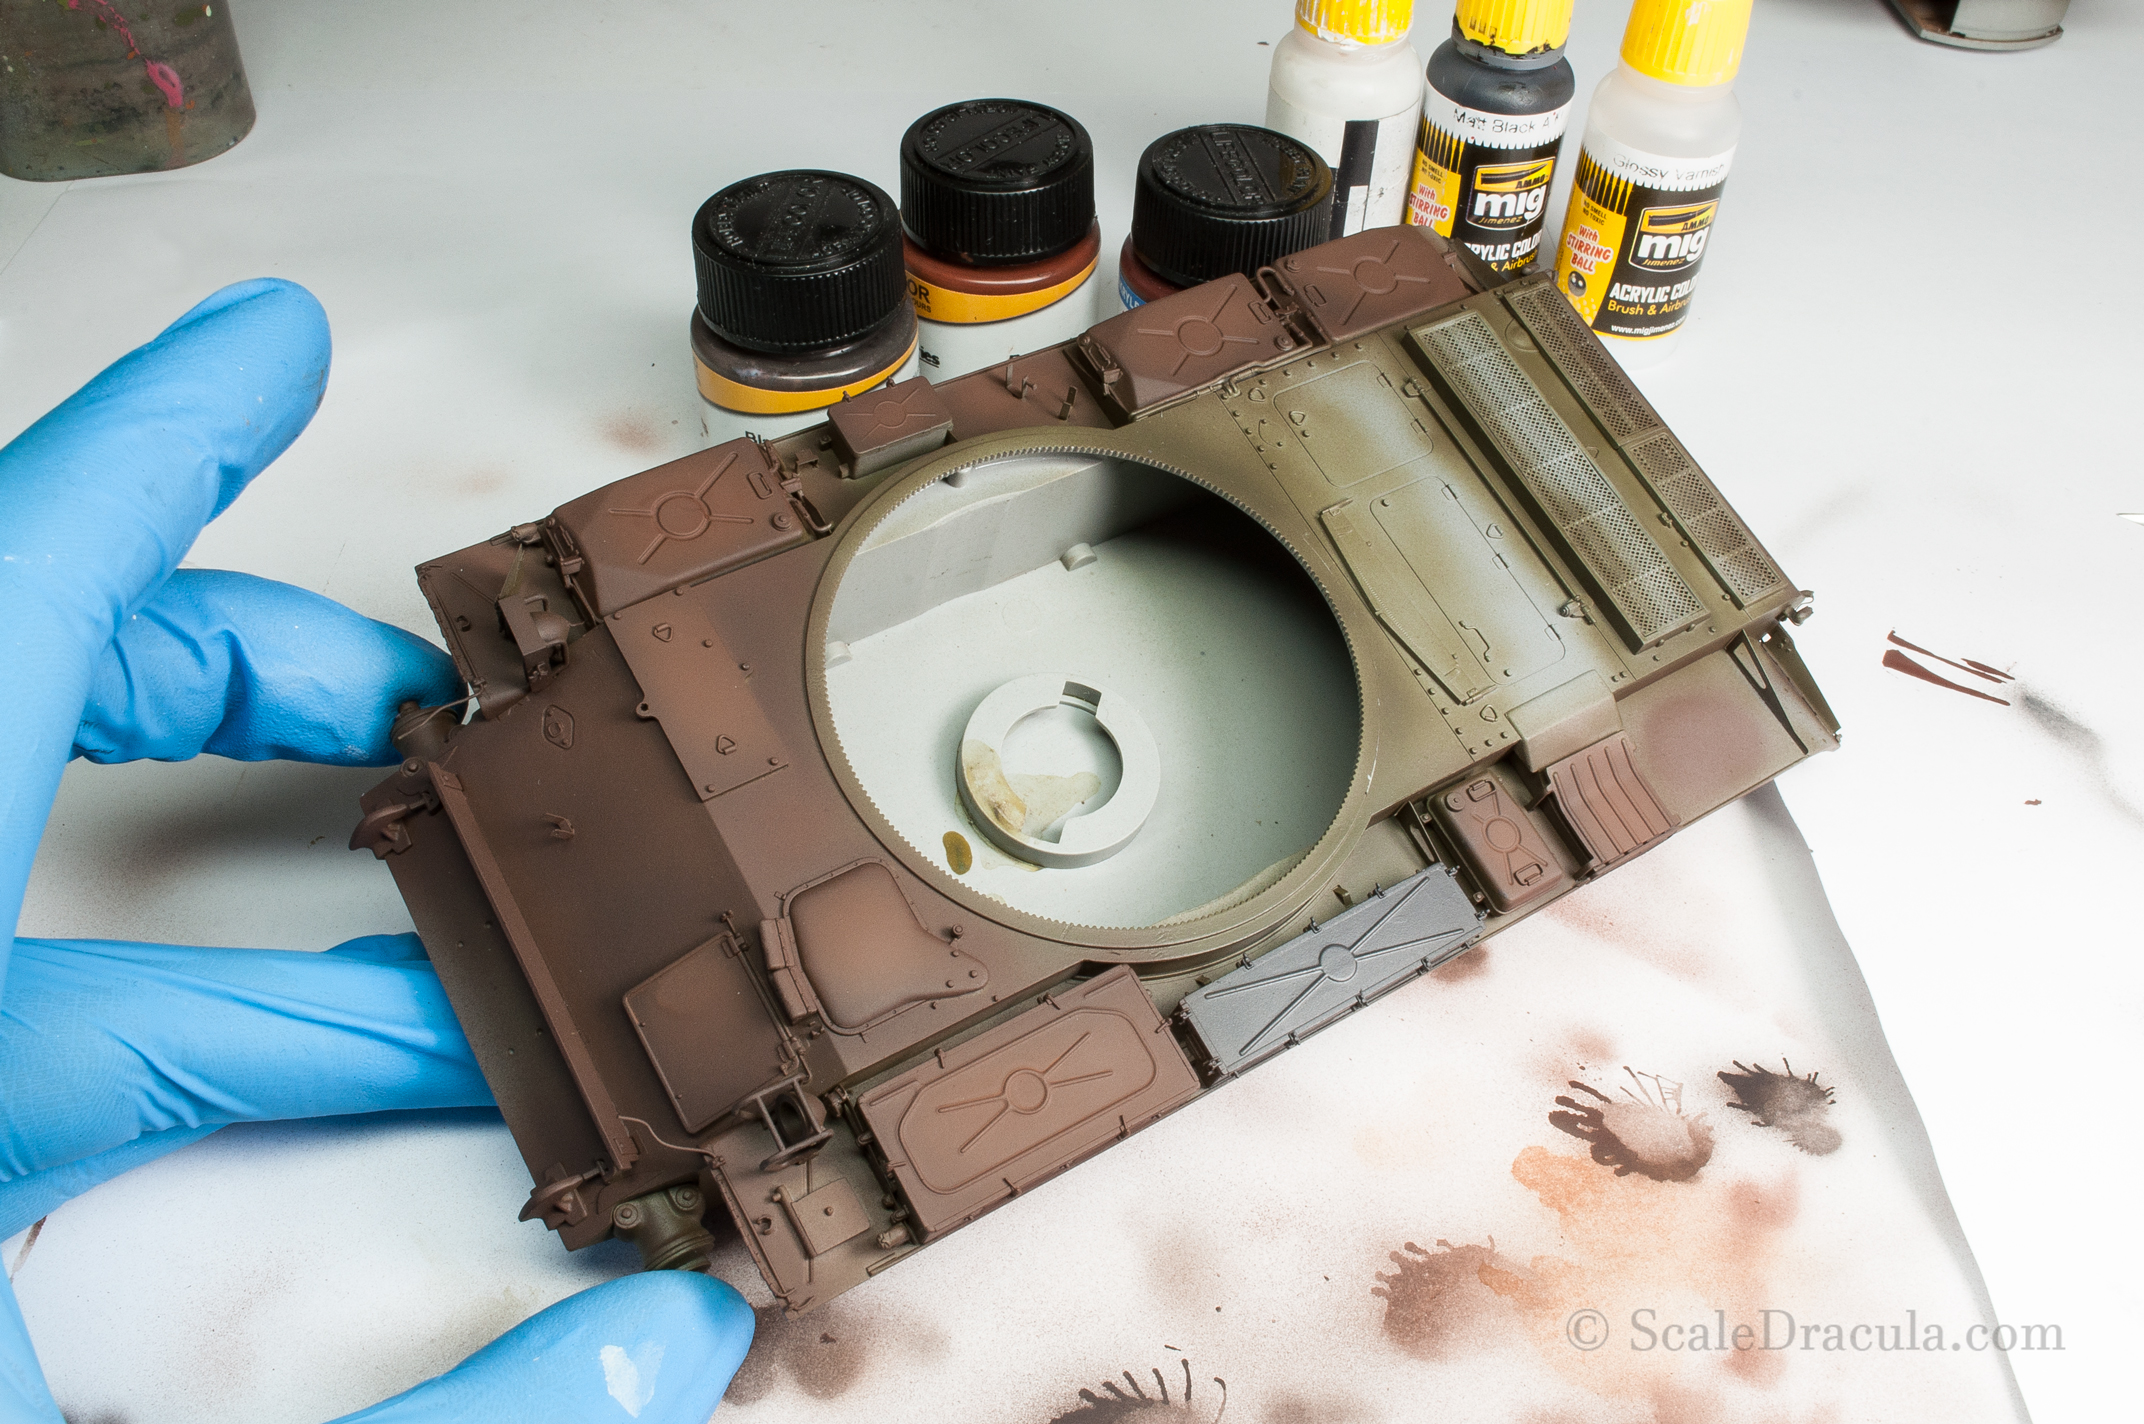 Building the layer of rust with Lifecolor, ZSU-57 by TAKOM